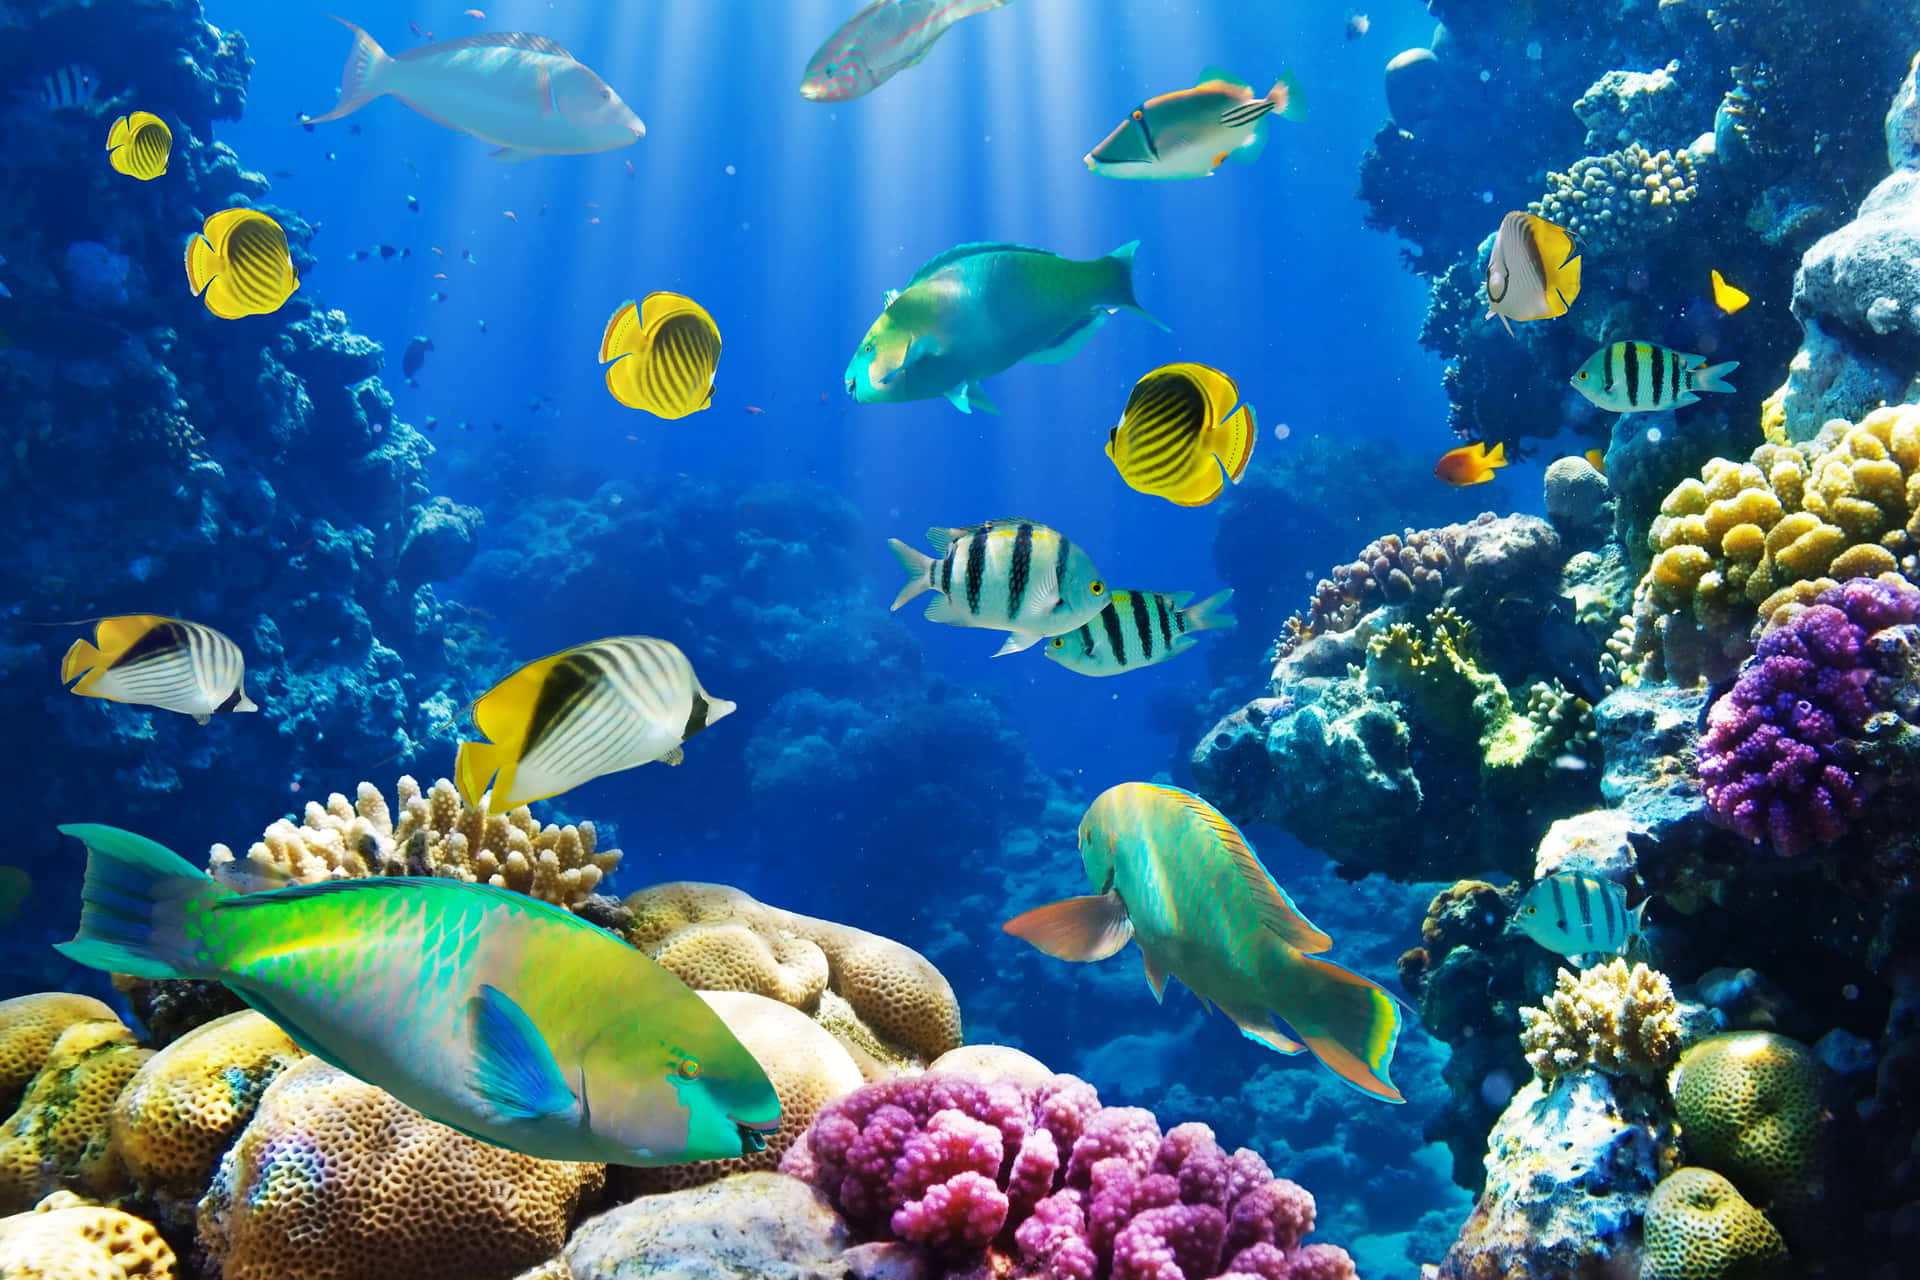 Discover the tranquil beauty of an aquarium.